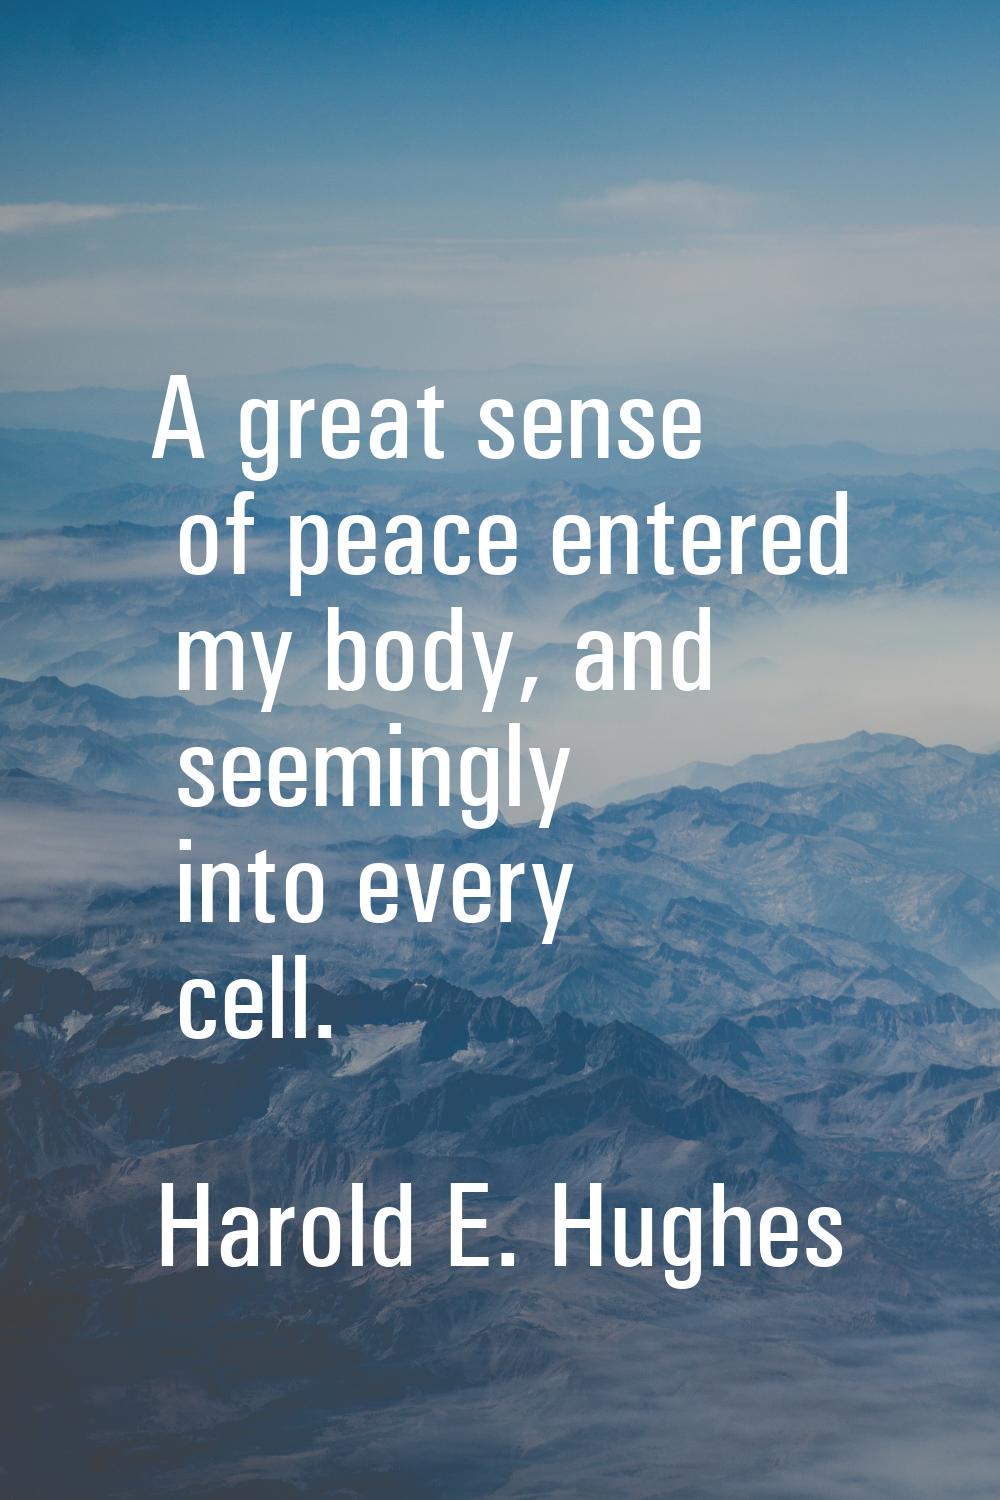 A great sense of peace entered my body, and seemingly into every cell.